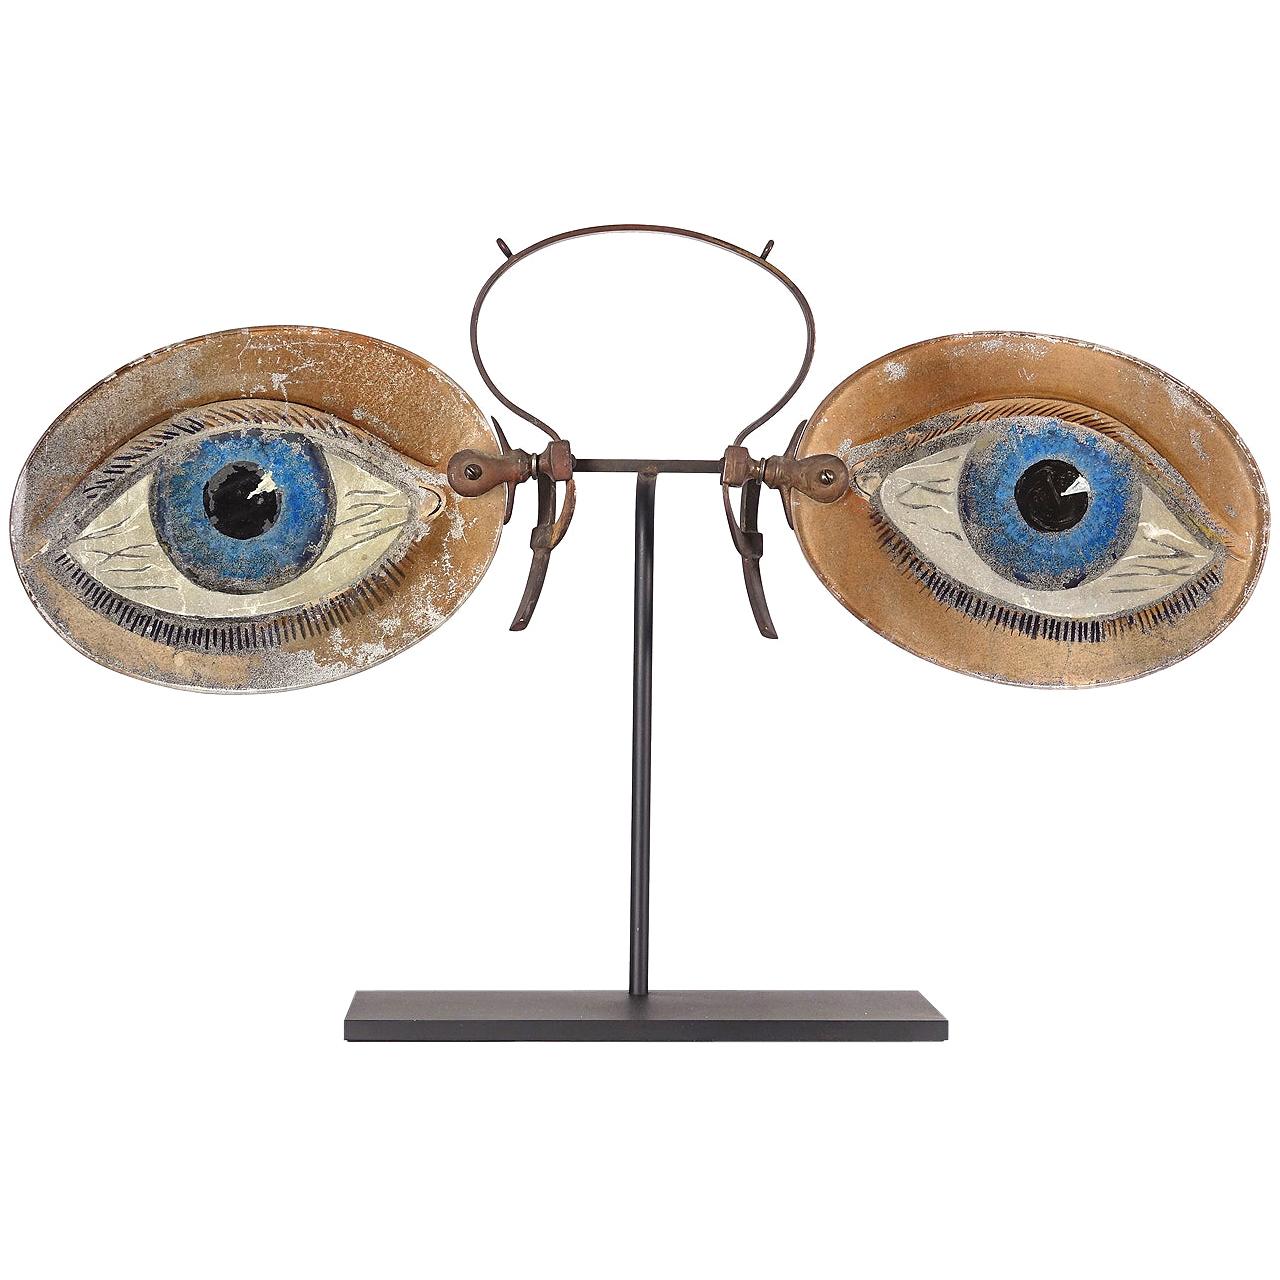 Figurial 1800s Spectacles Trade Sign